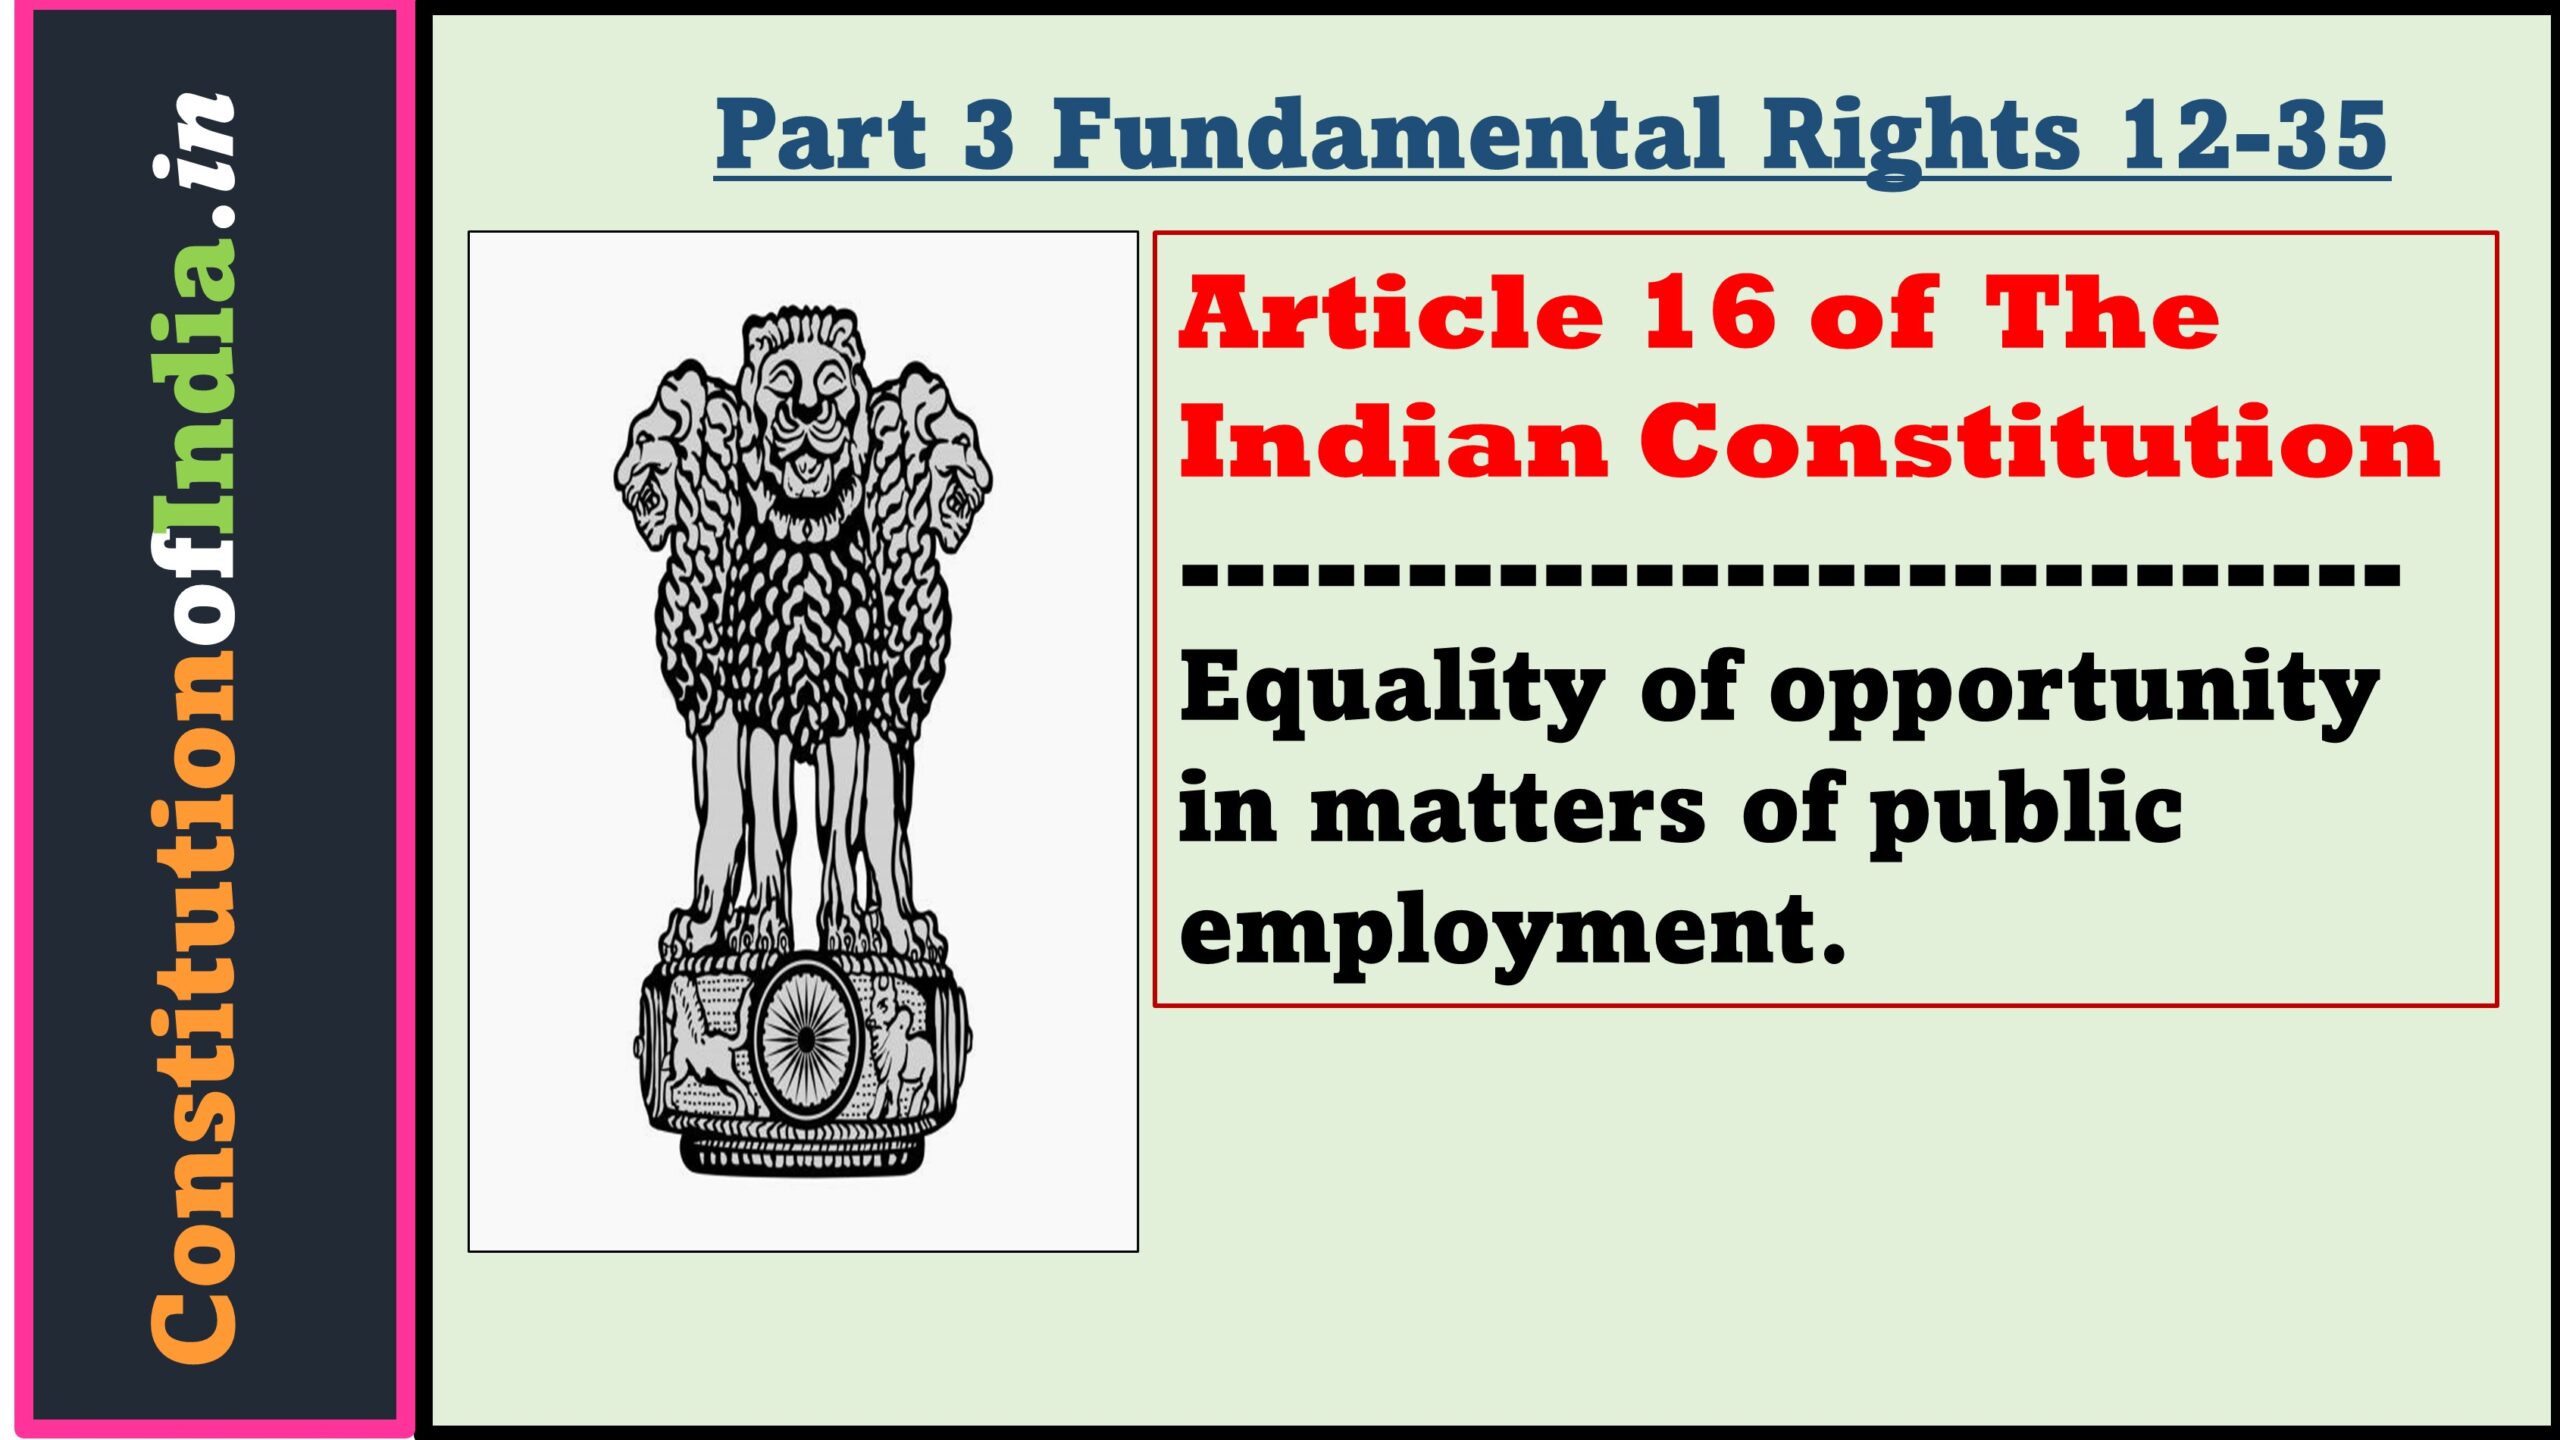 Article 16 of Indian Constitution